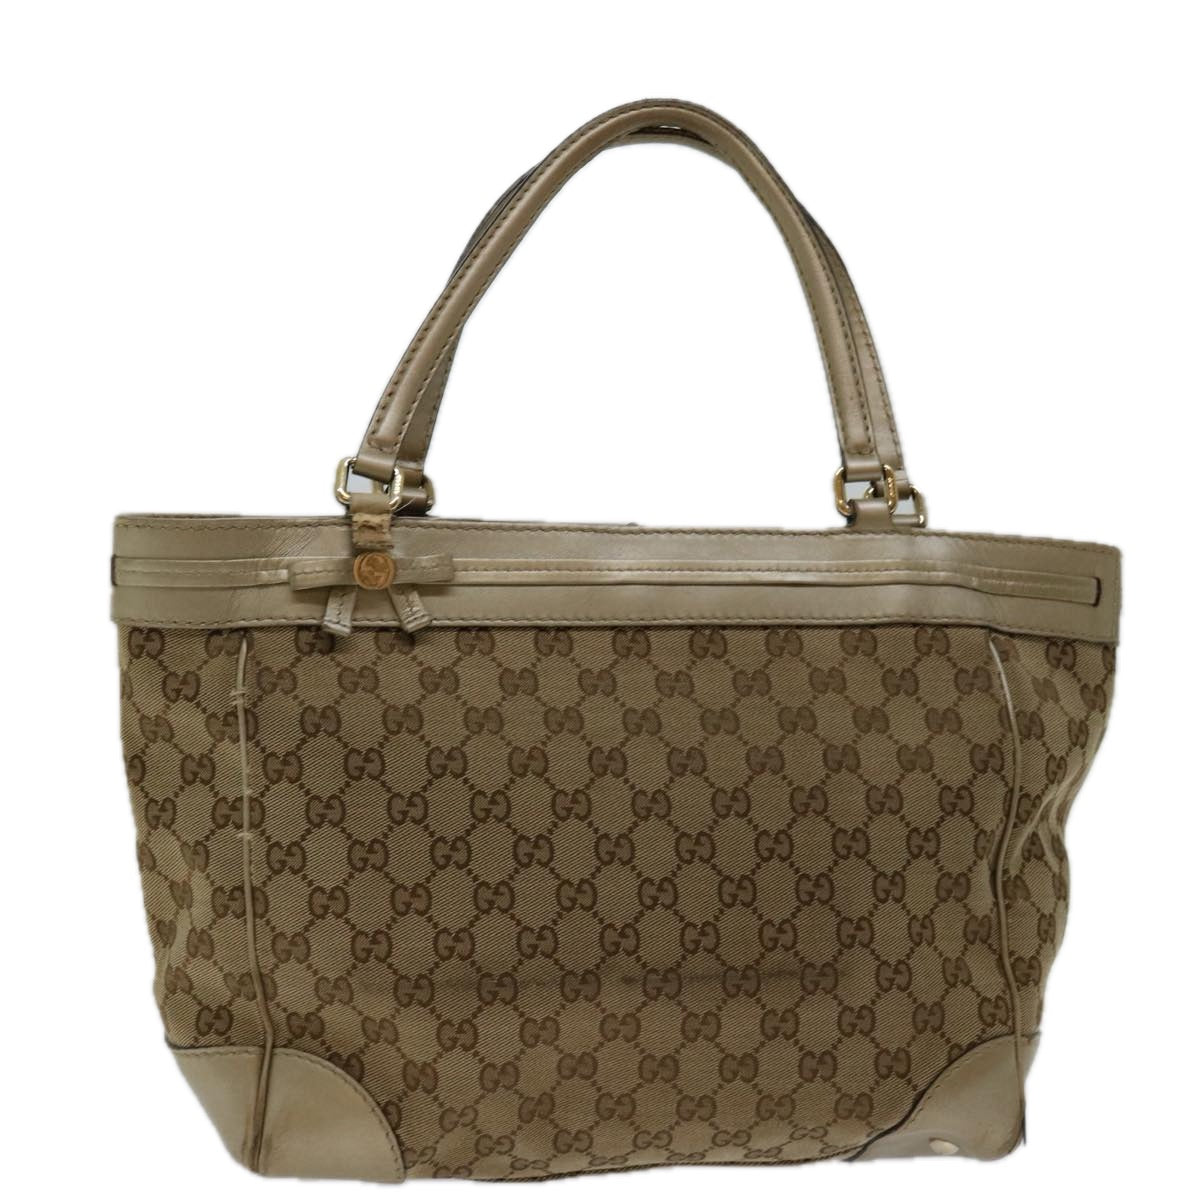 GUCCI GG Canvas Tote Bag Beige 257061 Auth bs13303